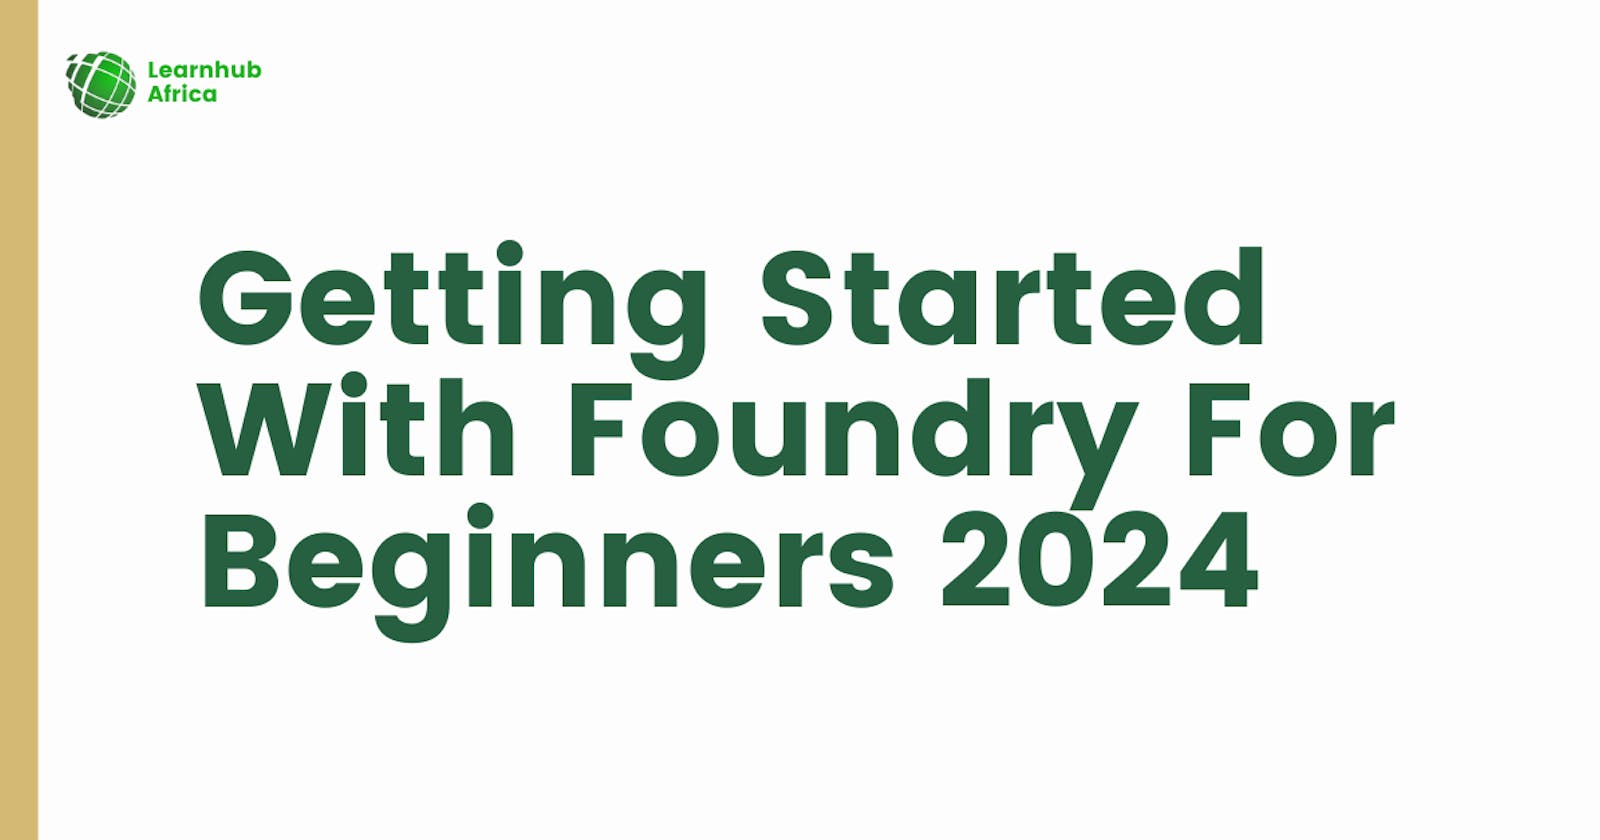 Getting Started with Foundry for Beginners in 2024